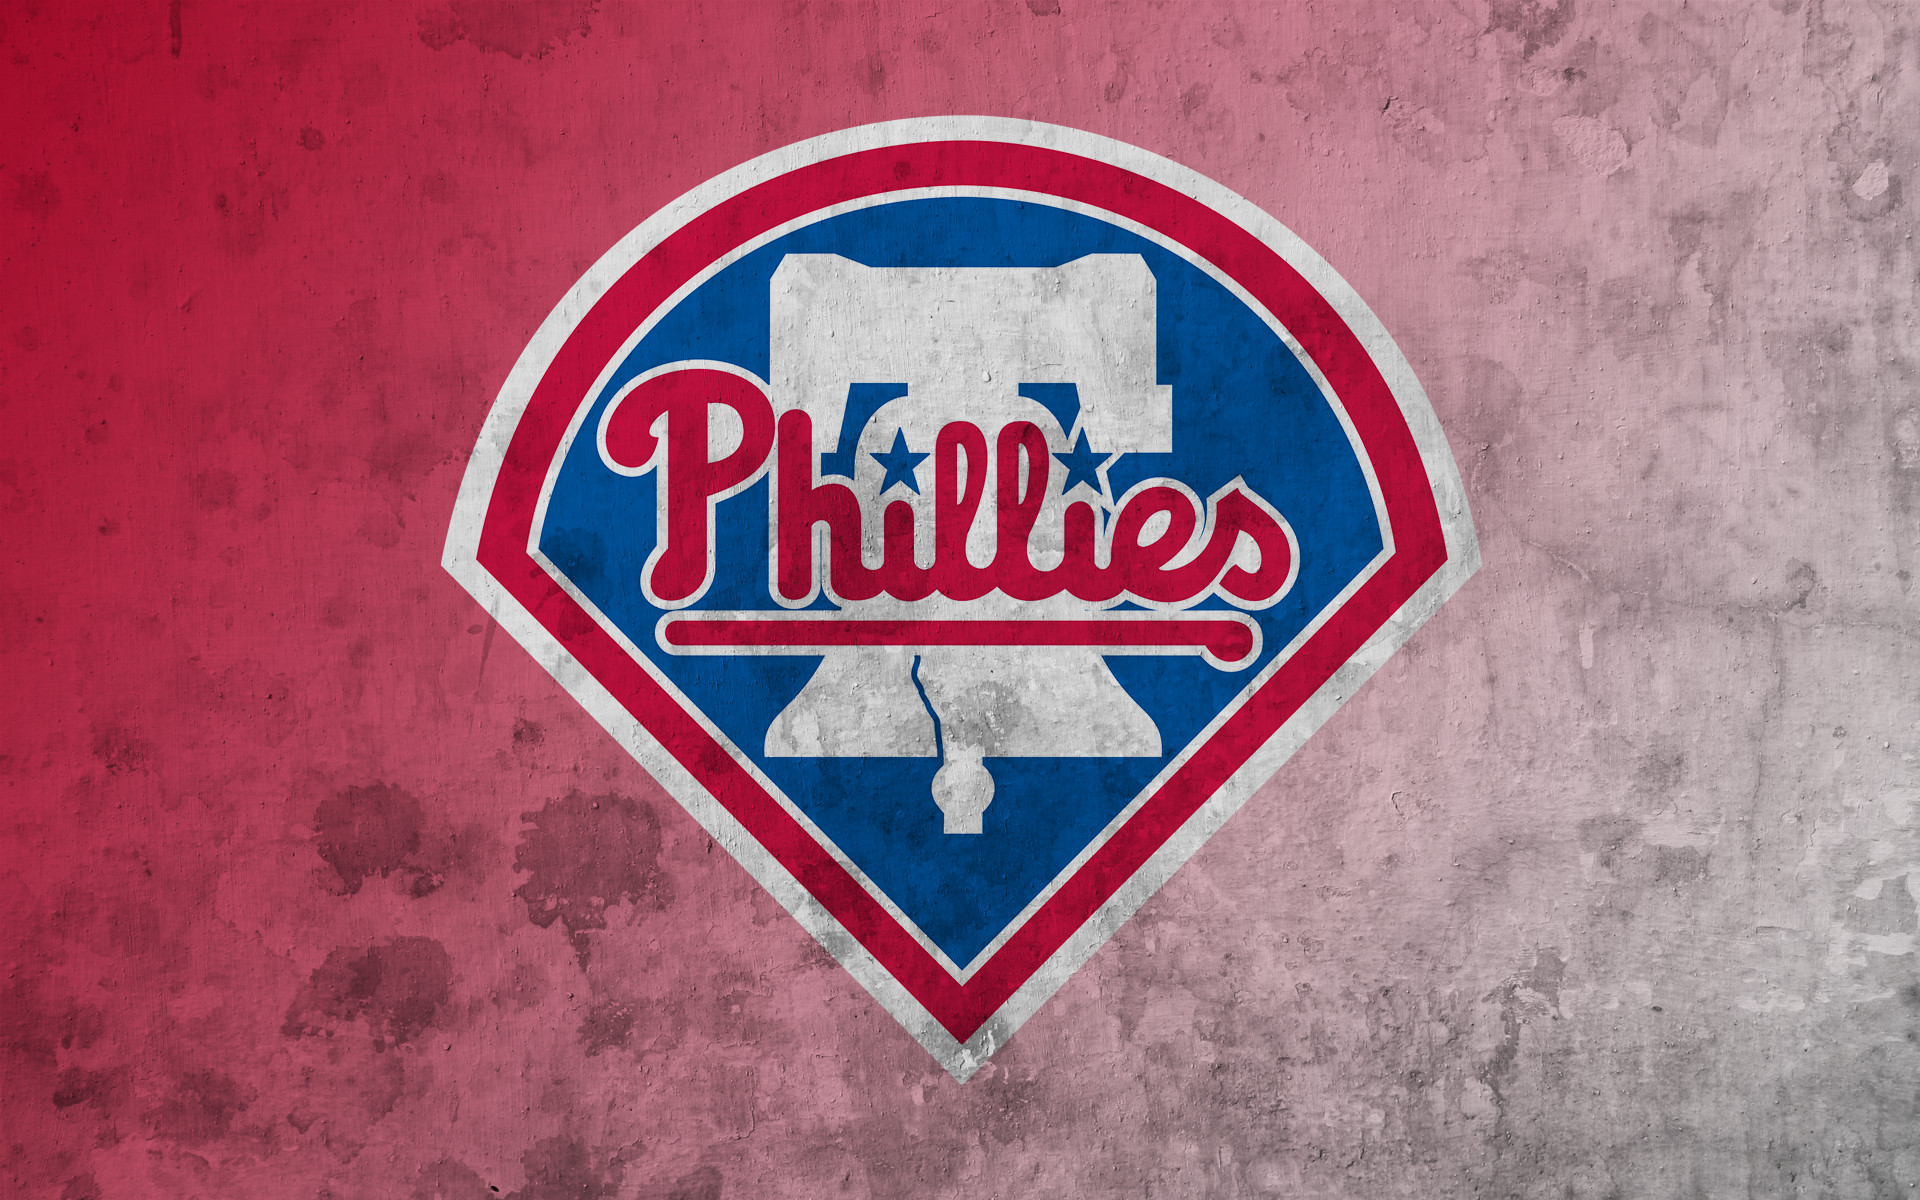 1920x1200 ... Phillies club logo on red and white ...